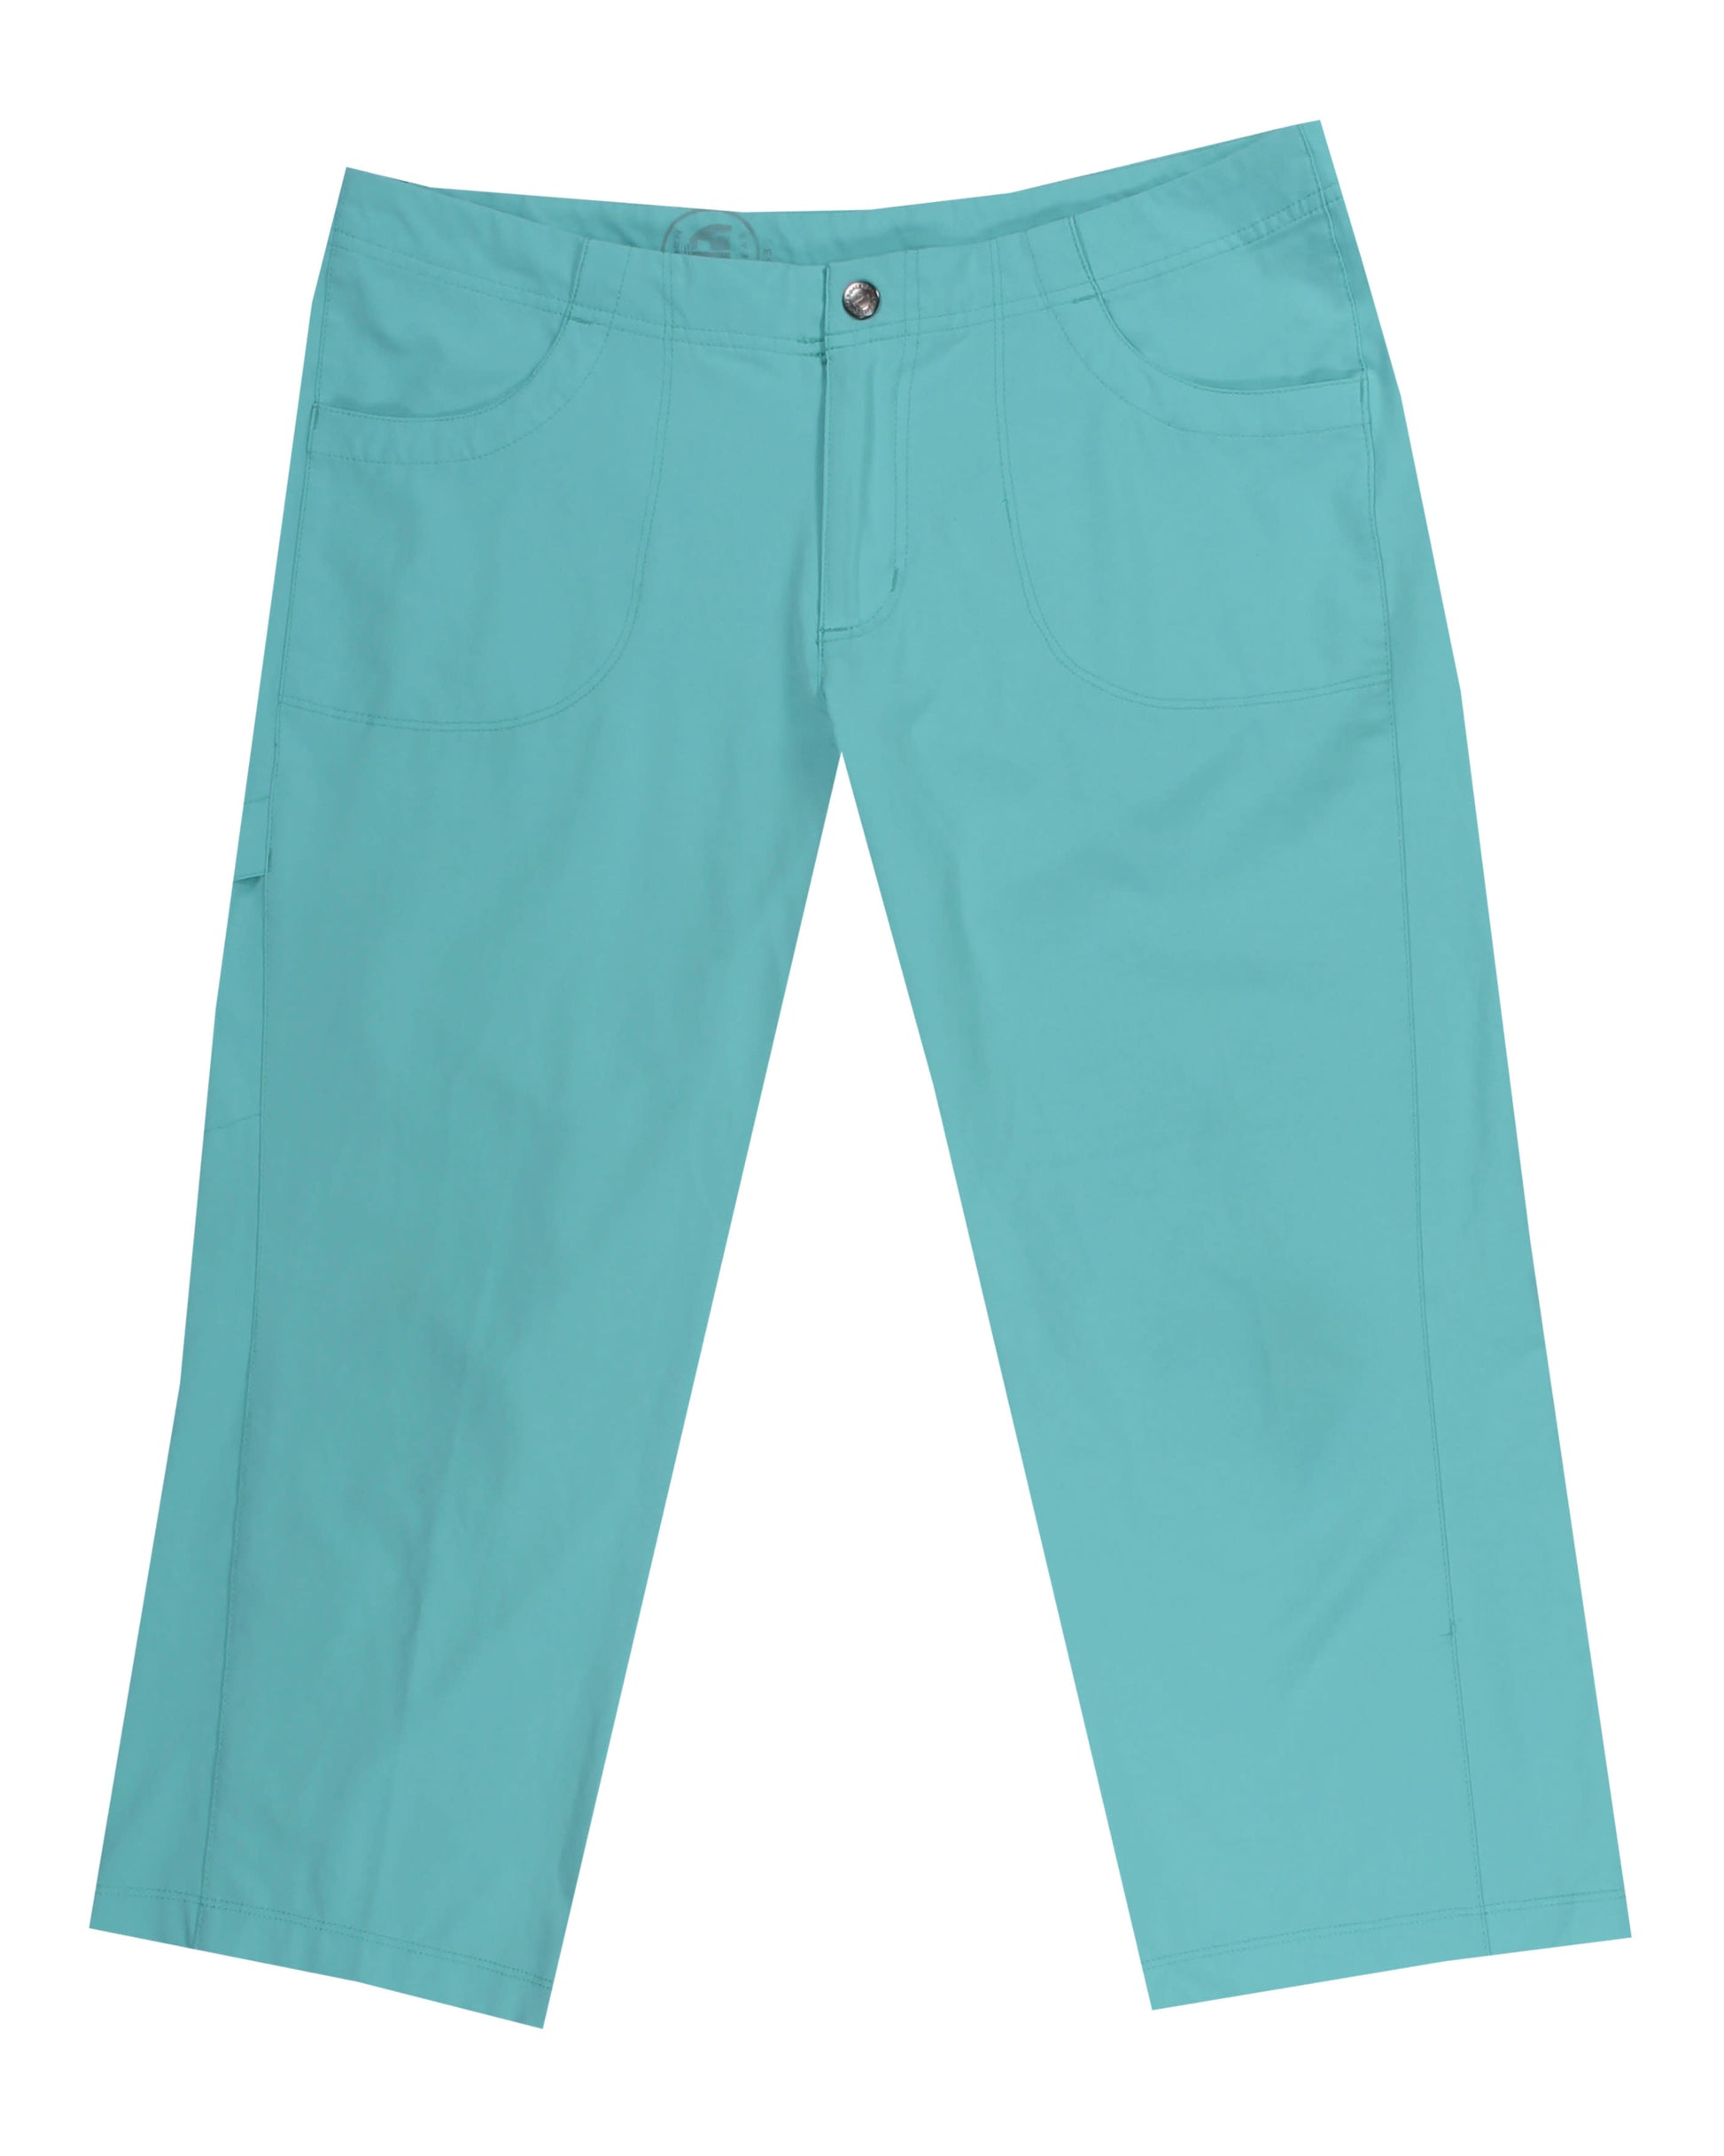 Patagonia All-Out Capri Pant - Women's Quick dry fabric